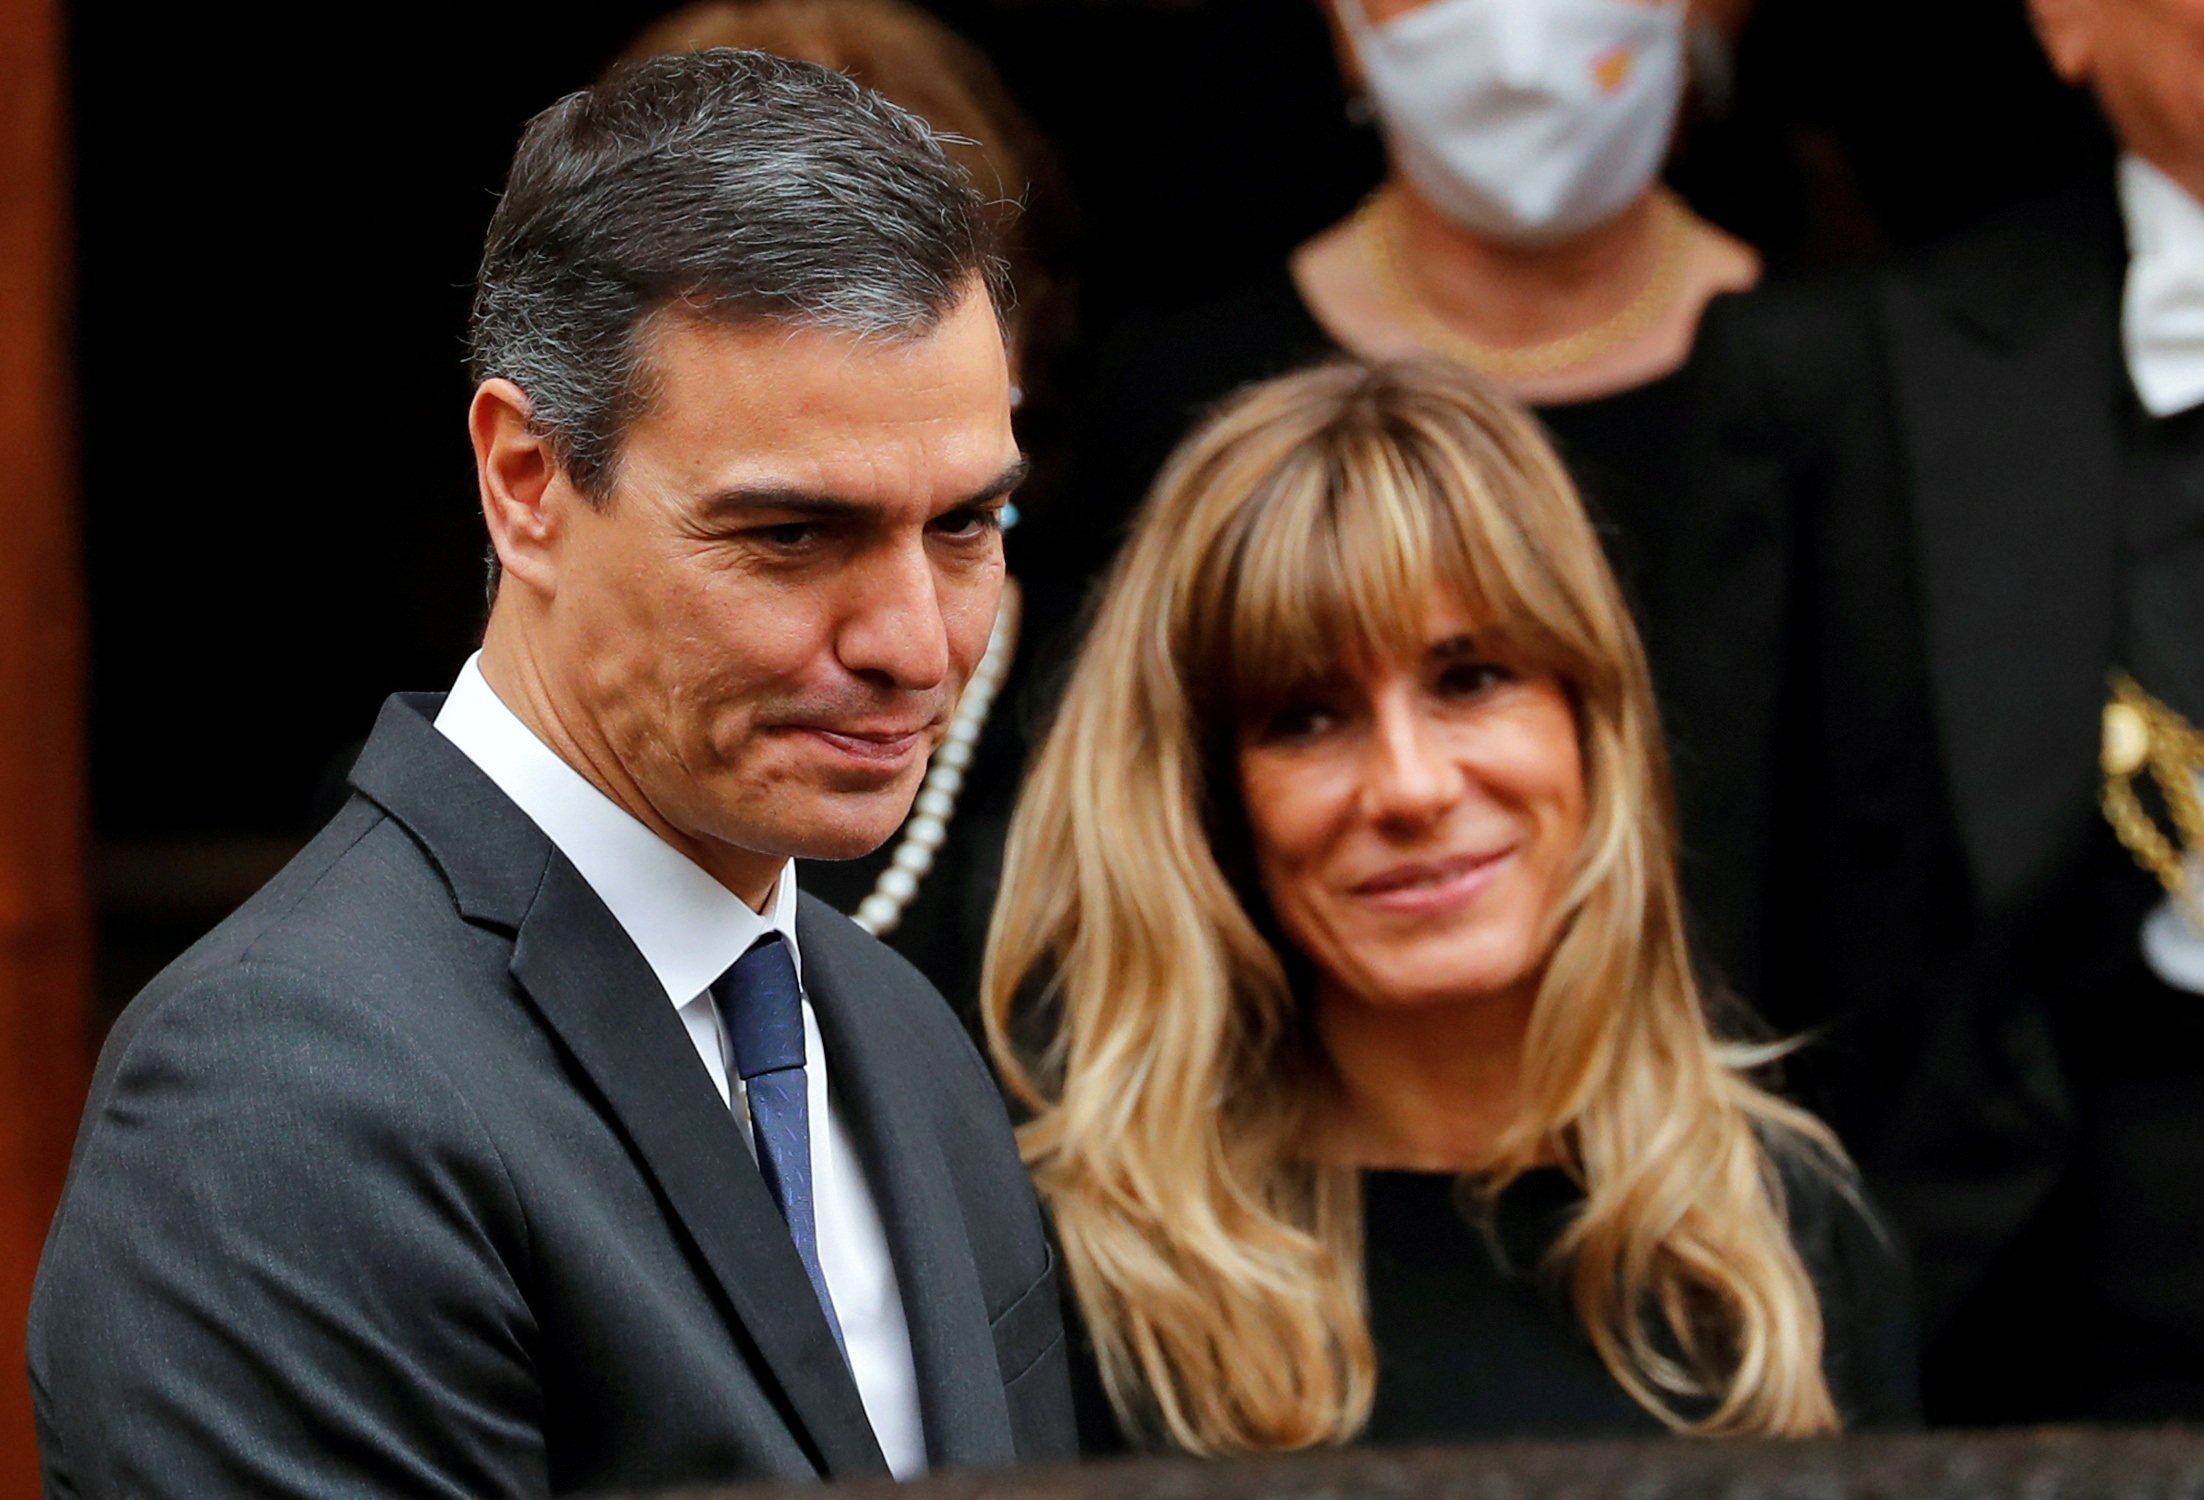 Spanish Prime Minister Pedro Sanchez and his wife, Begona Gomez, leave after meeting with Pope Francis at the Vatican in October 2020. Photo: Reuters